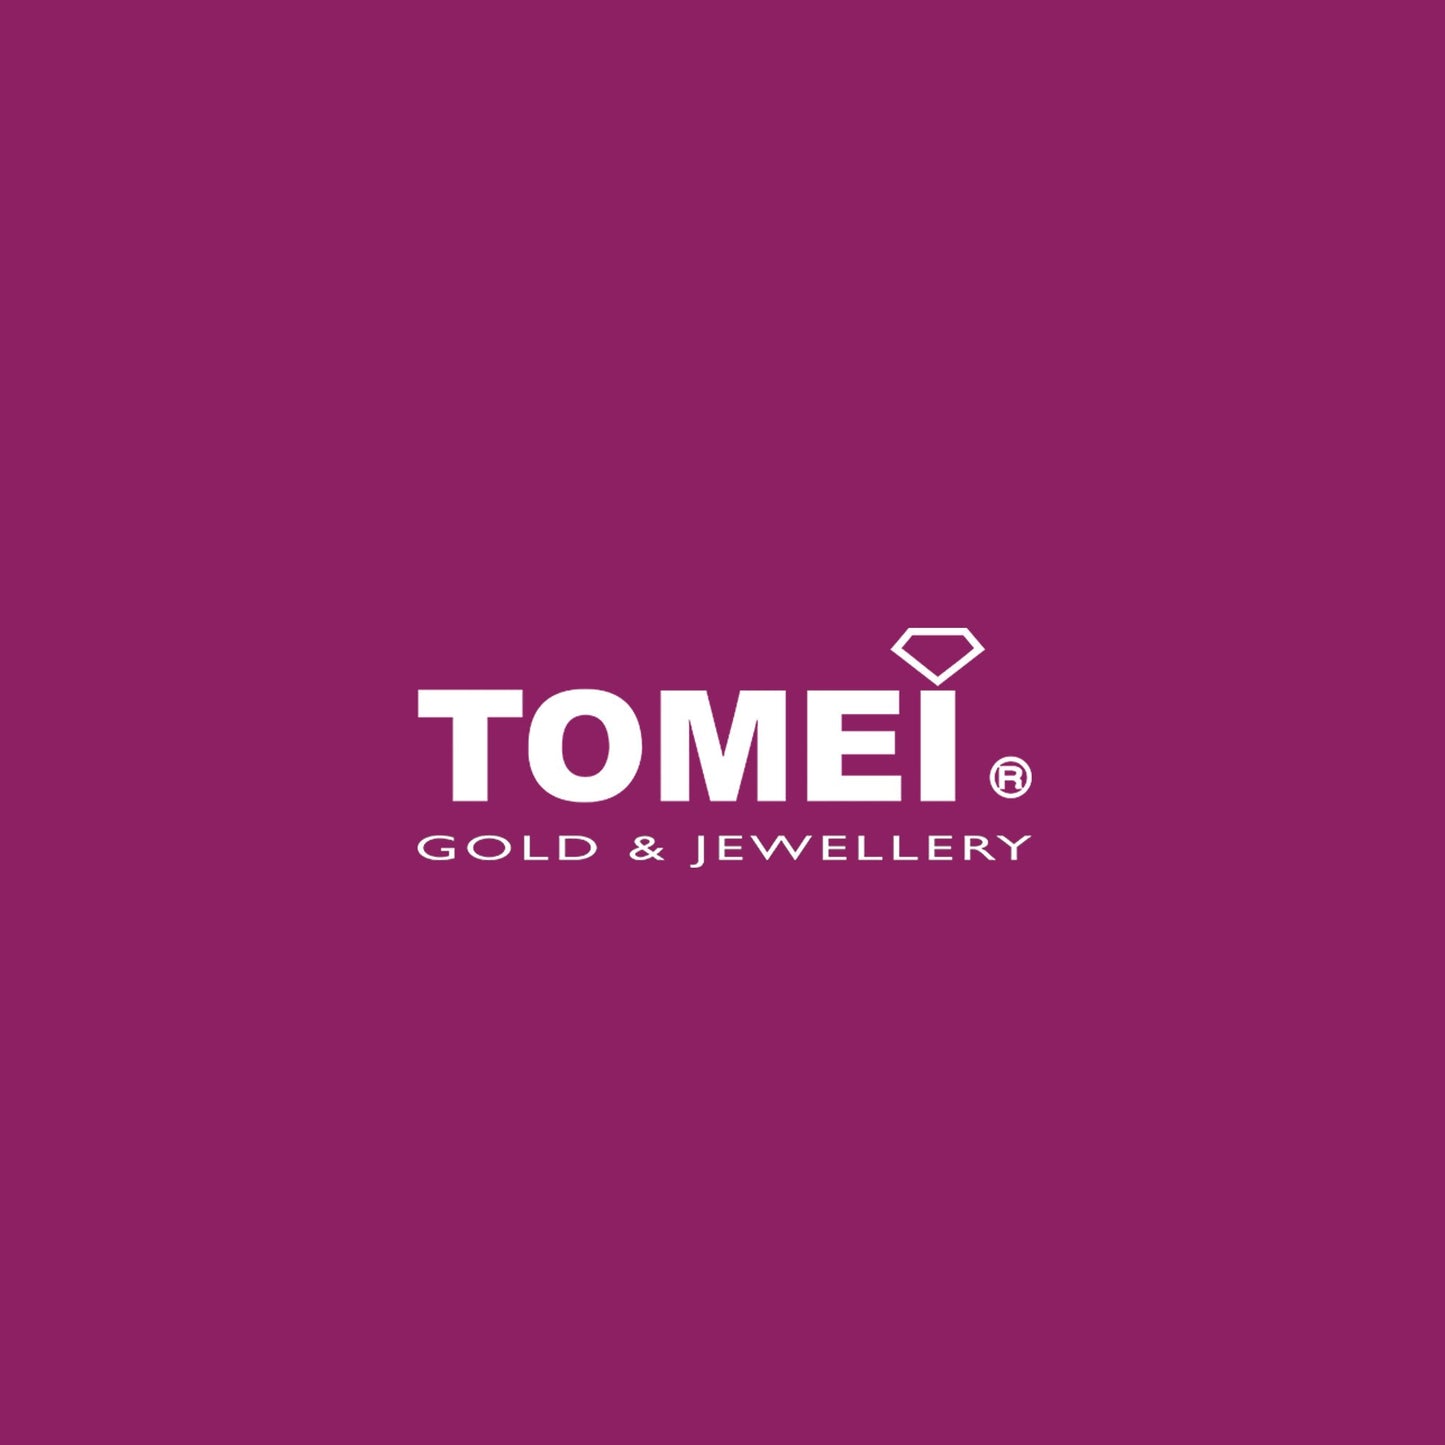 TOMEI Gemstones with Diamond Bracelet Double Strands, White Gold 375